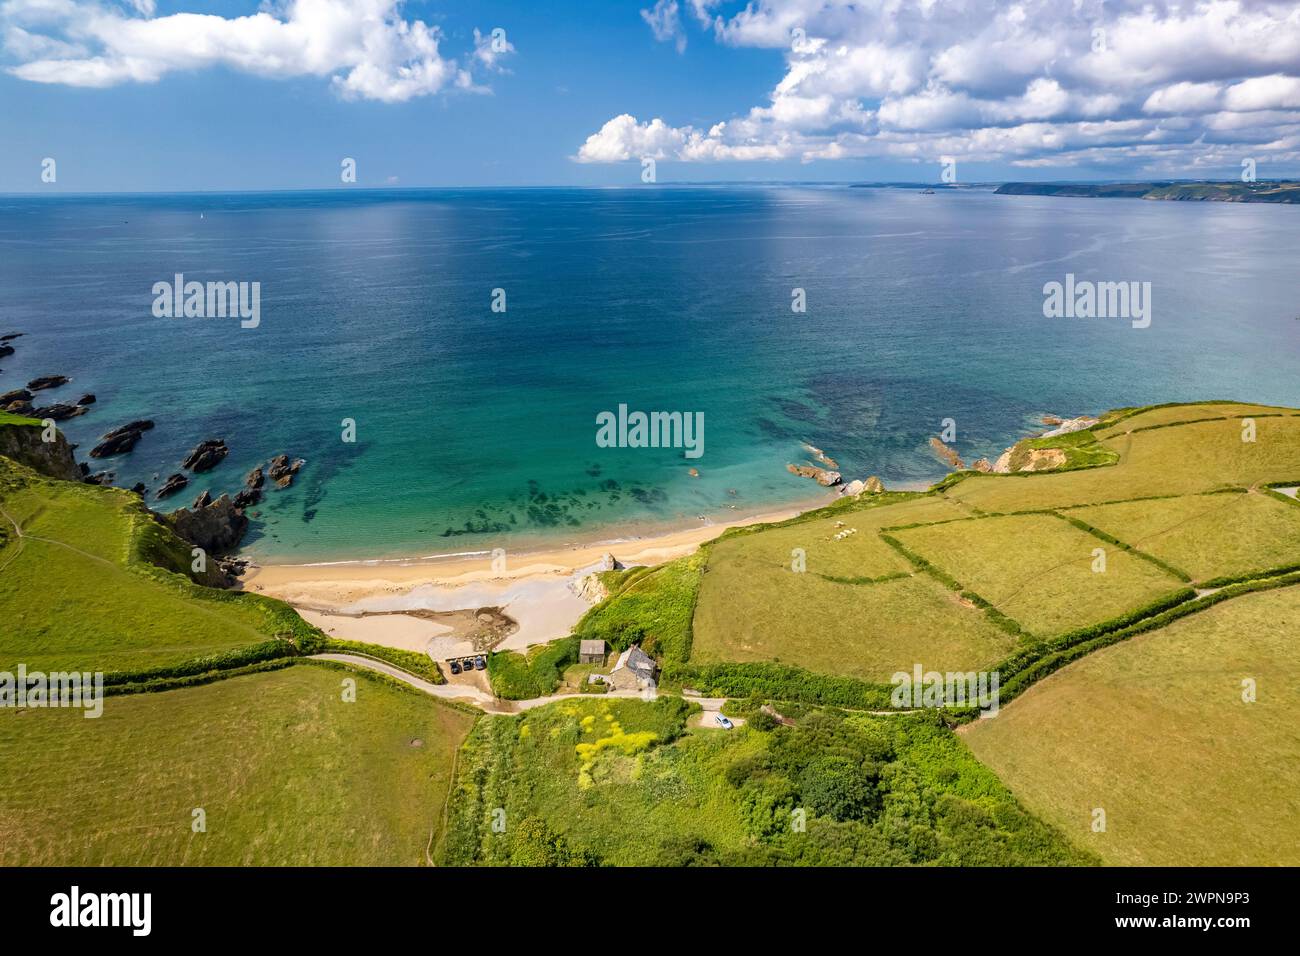 Hemmick Beach and the coast of St Austell seen from the air, Cornwall, England, Great Britain, Europe Stock Photo